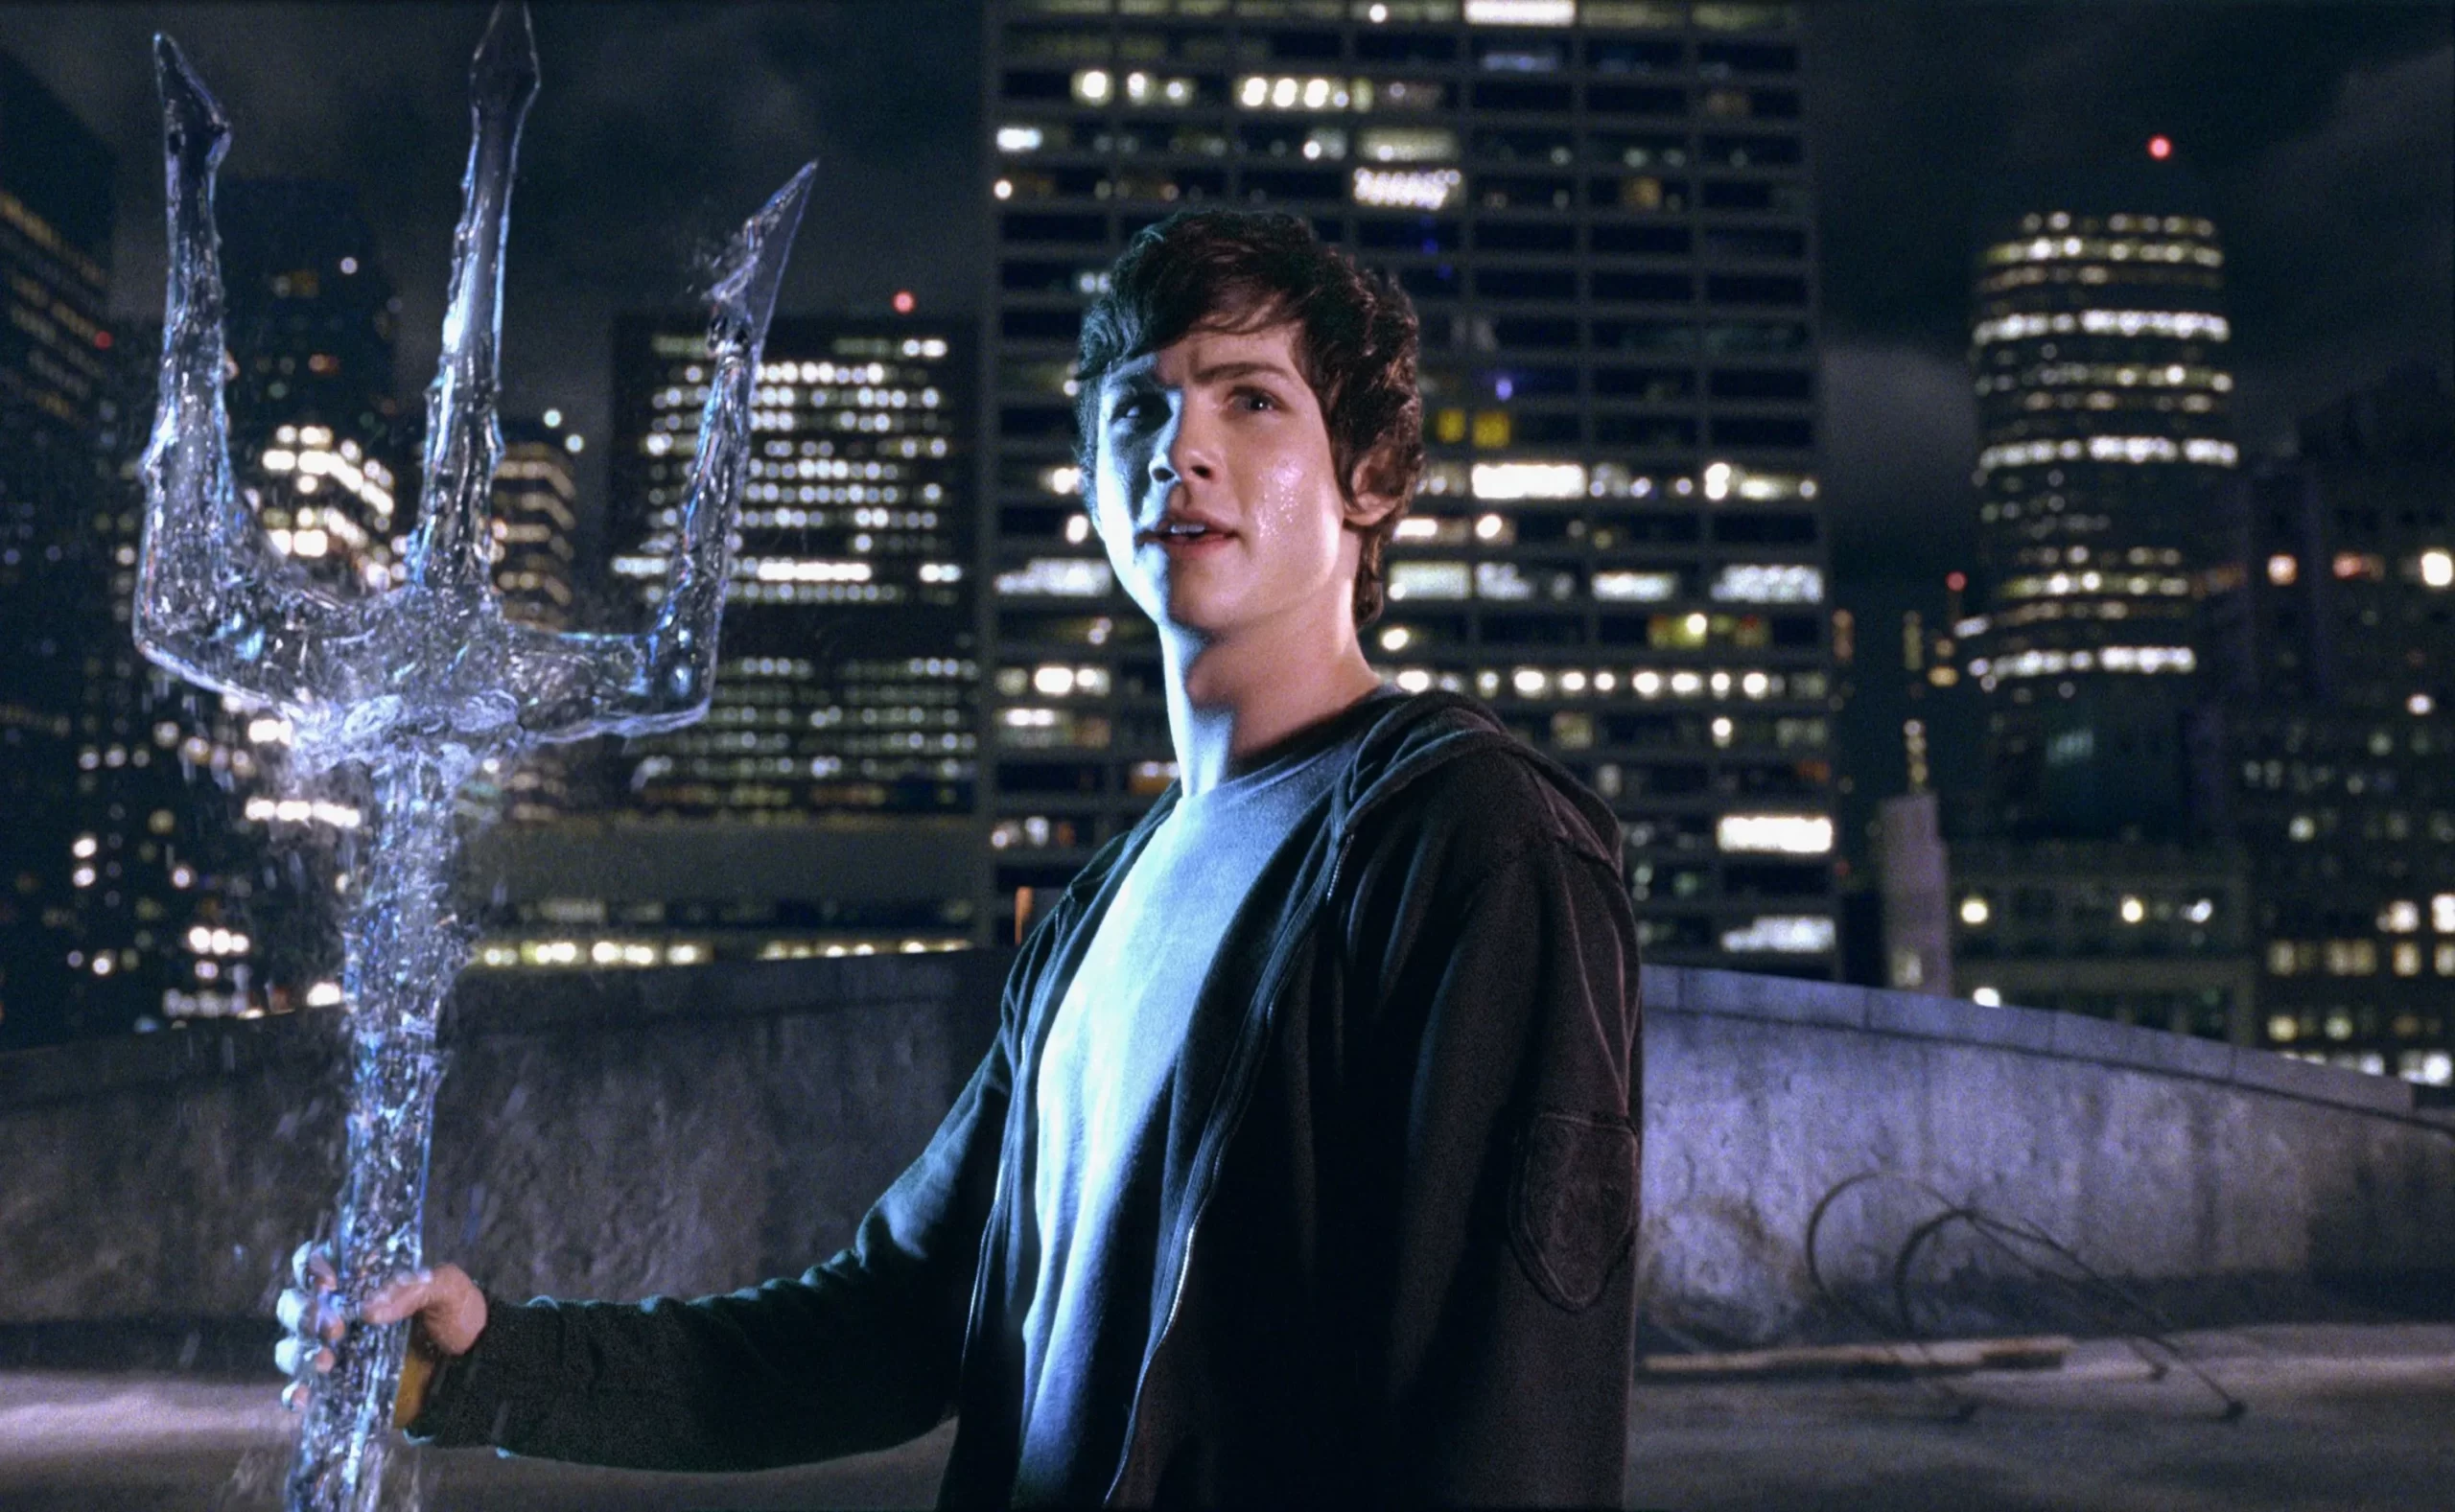 What God is Percy Jackson?